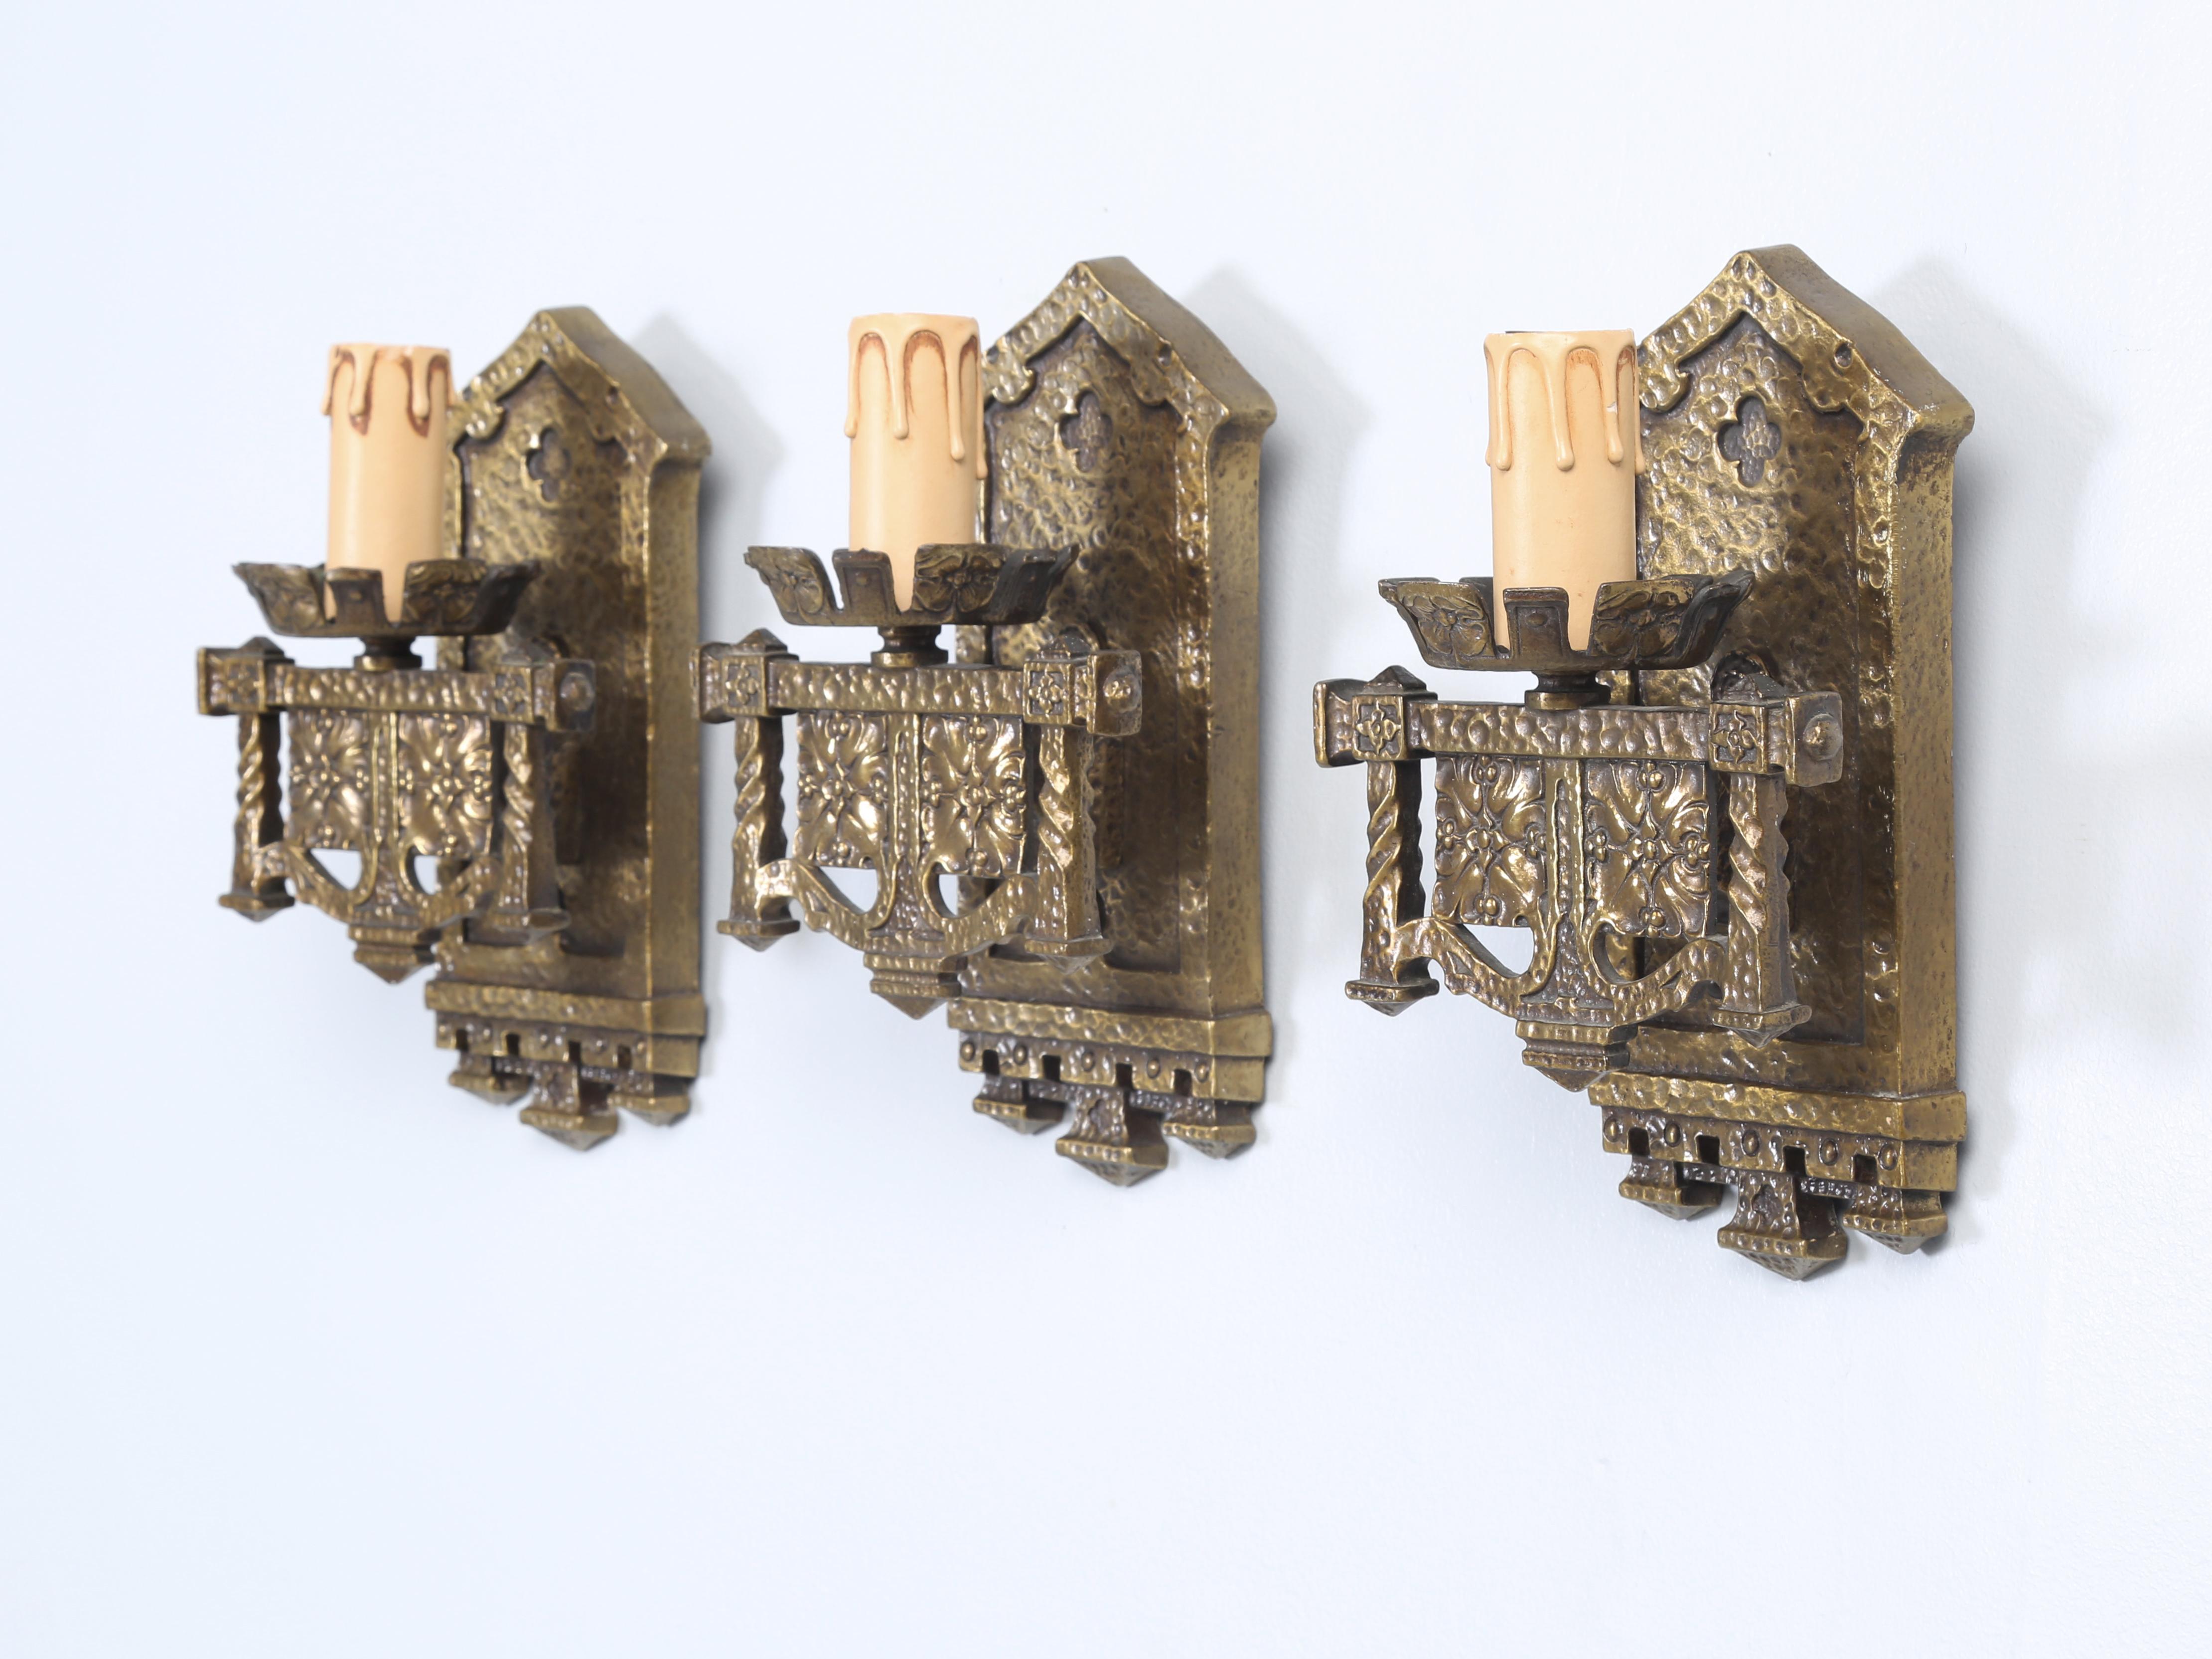 Set of (3) very heavy hand-made solid brass sconces that were removed from The John Rogerson Montgomery House, which was designed by noted architect Howard Van Doren Shaw in Glencoe, Illinois. The home is considered to be a significant example of